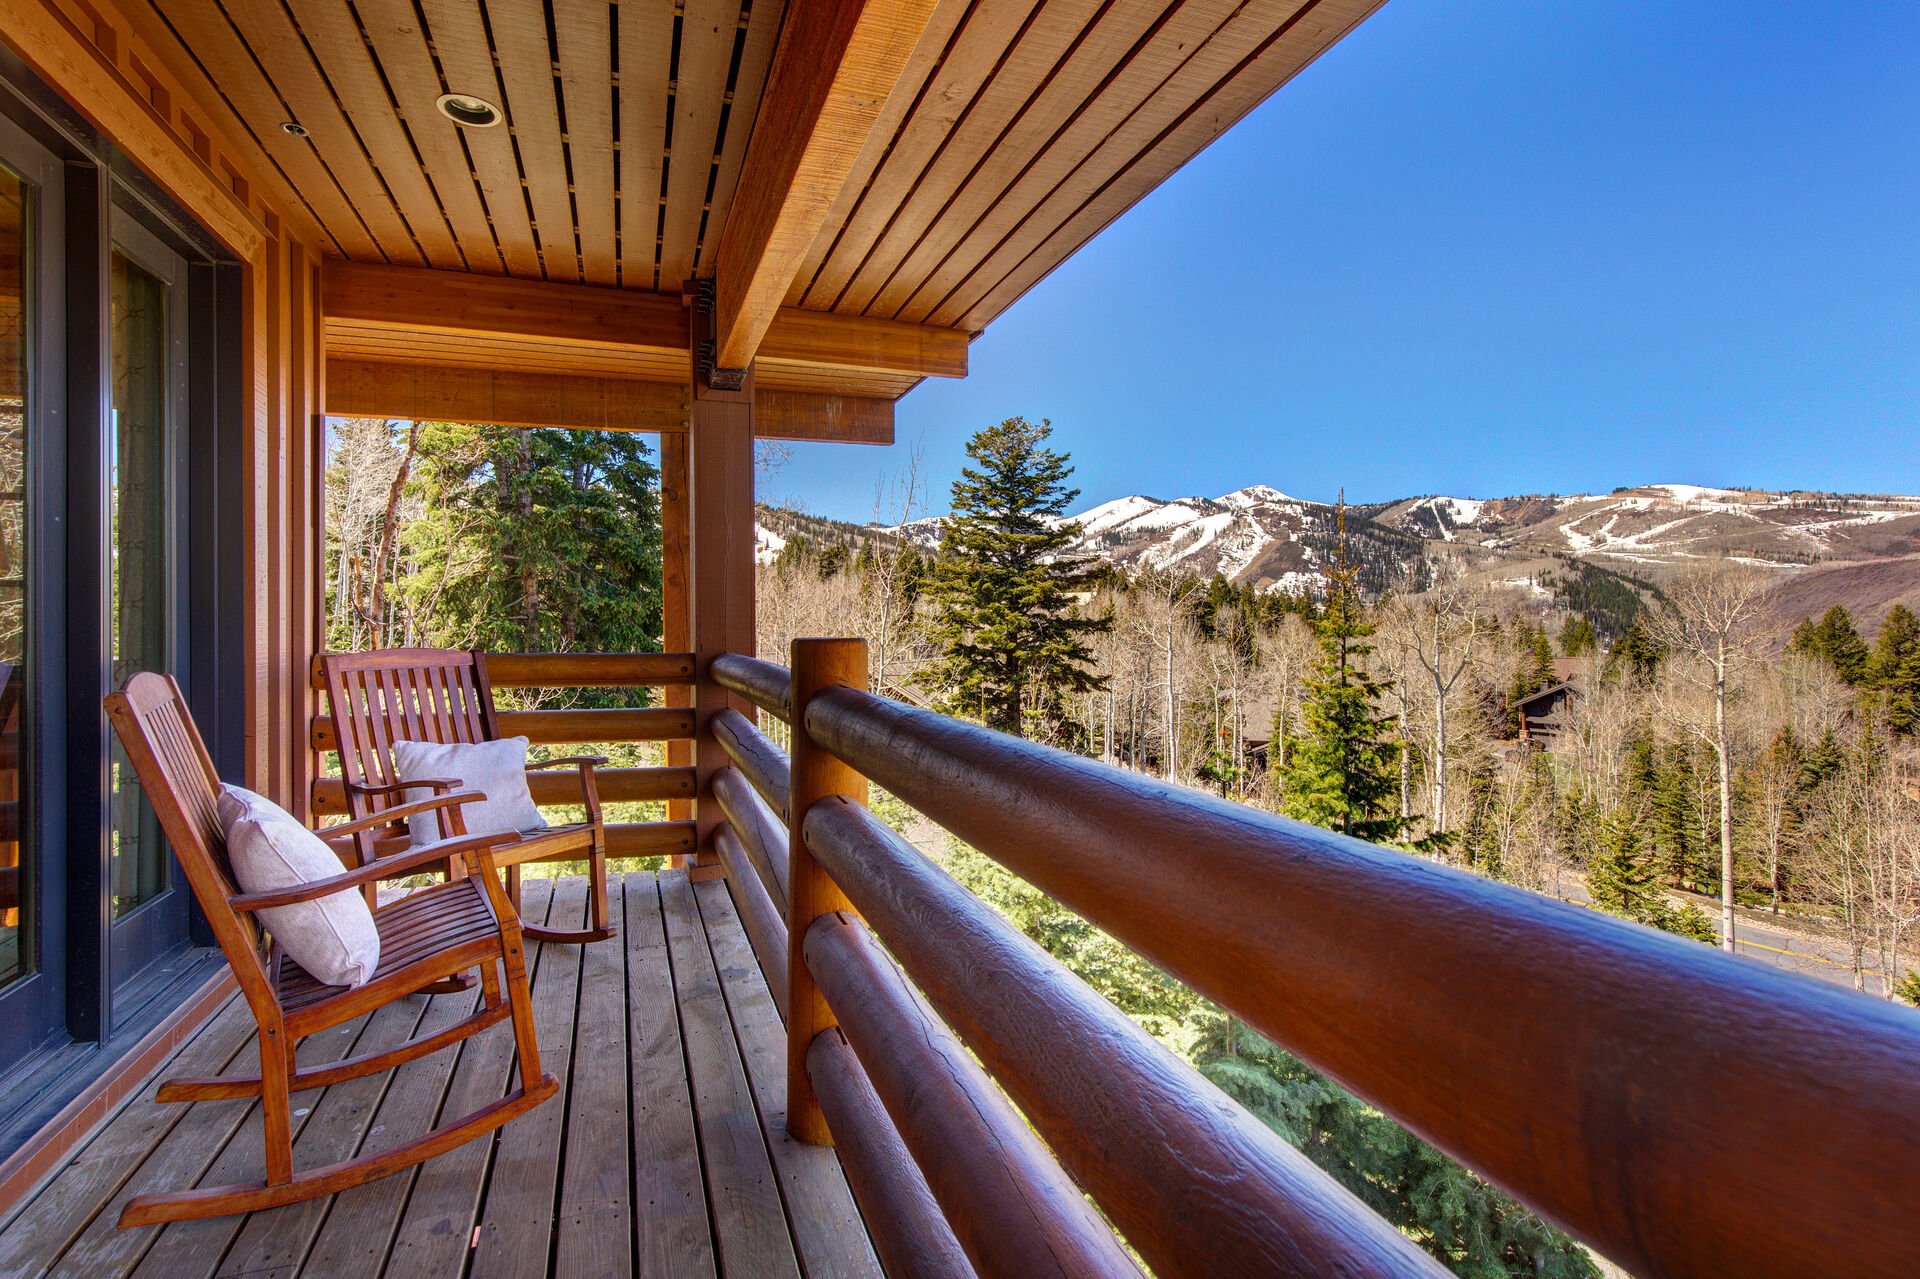 The Balcony with Mountain View in Our Park City Rental Properties.